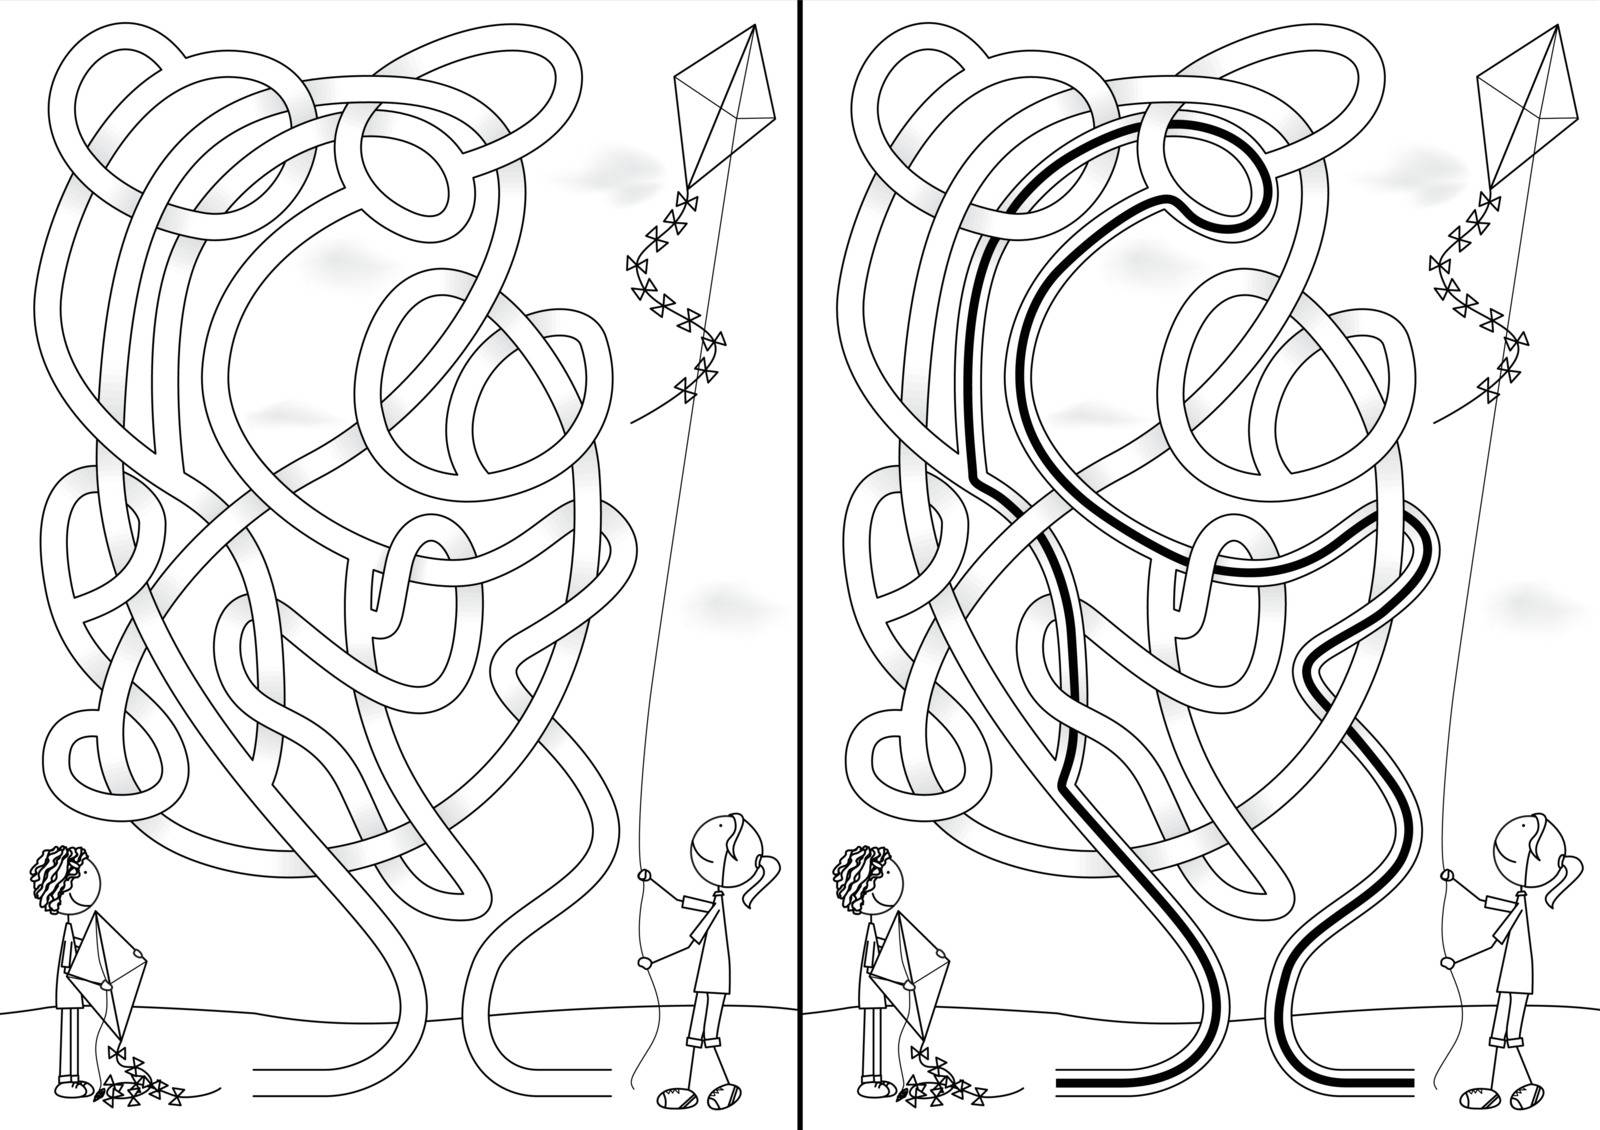 Kite maze for kids with a solution in black and white